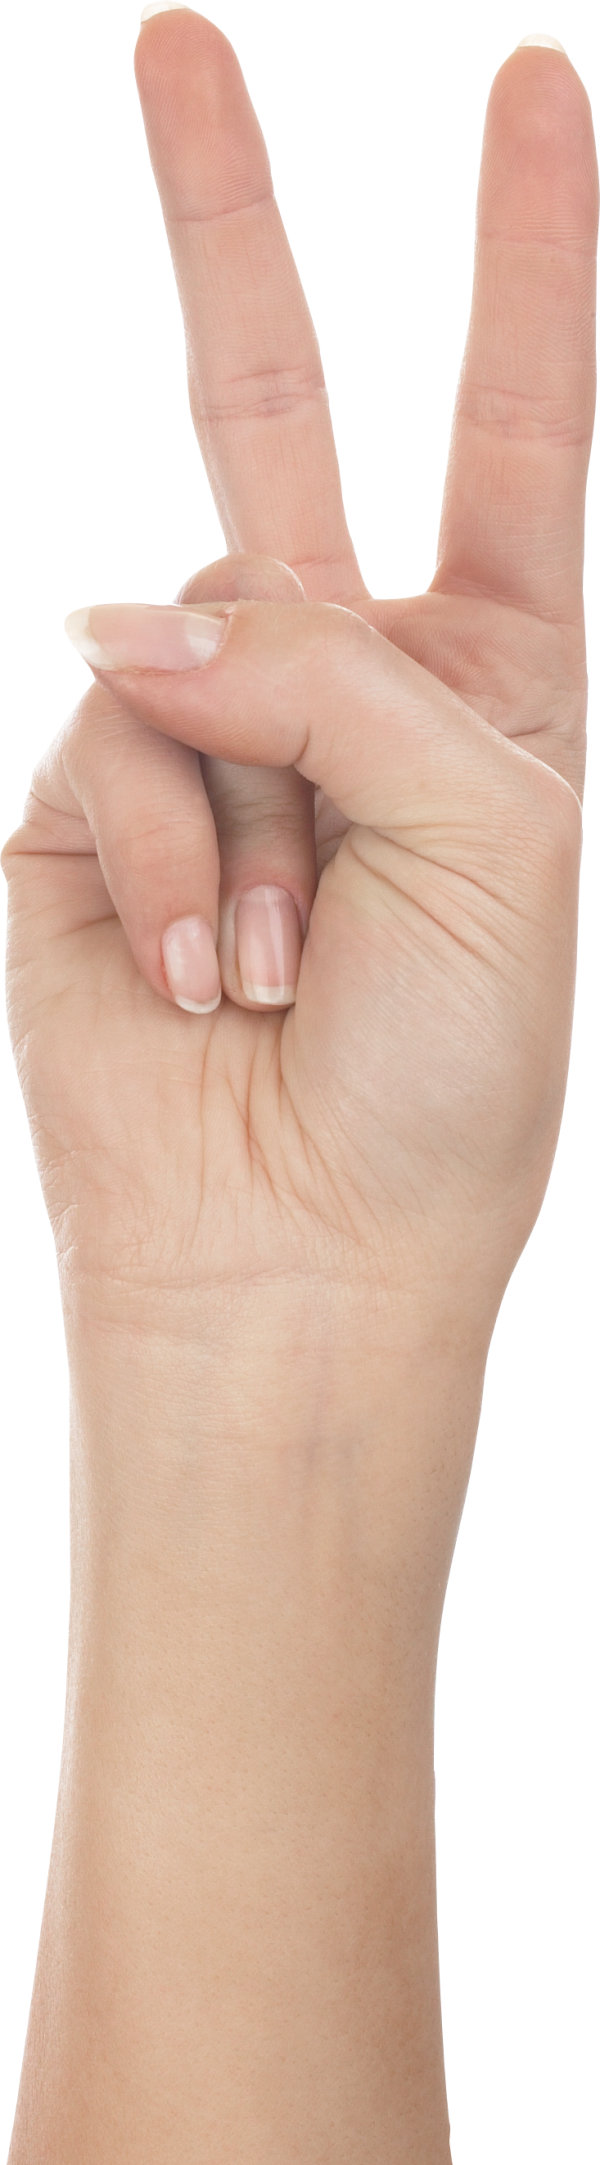 Hands PNG Free Image Download 18